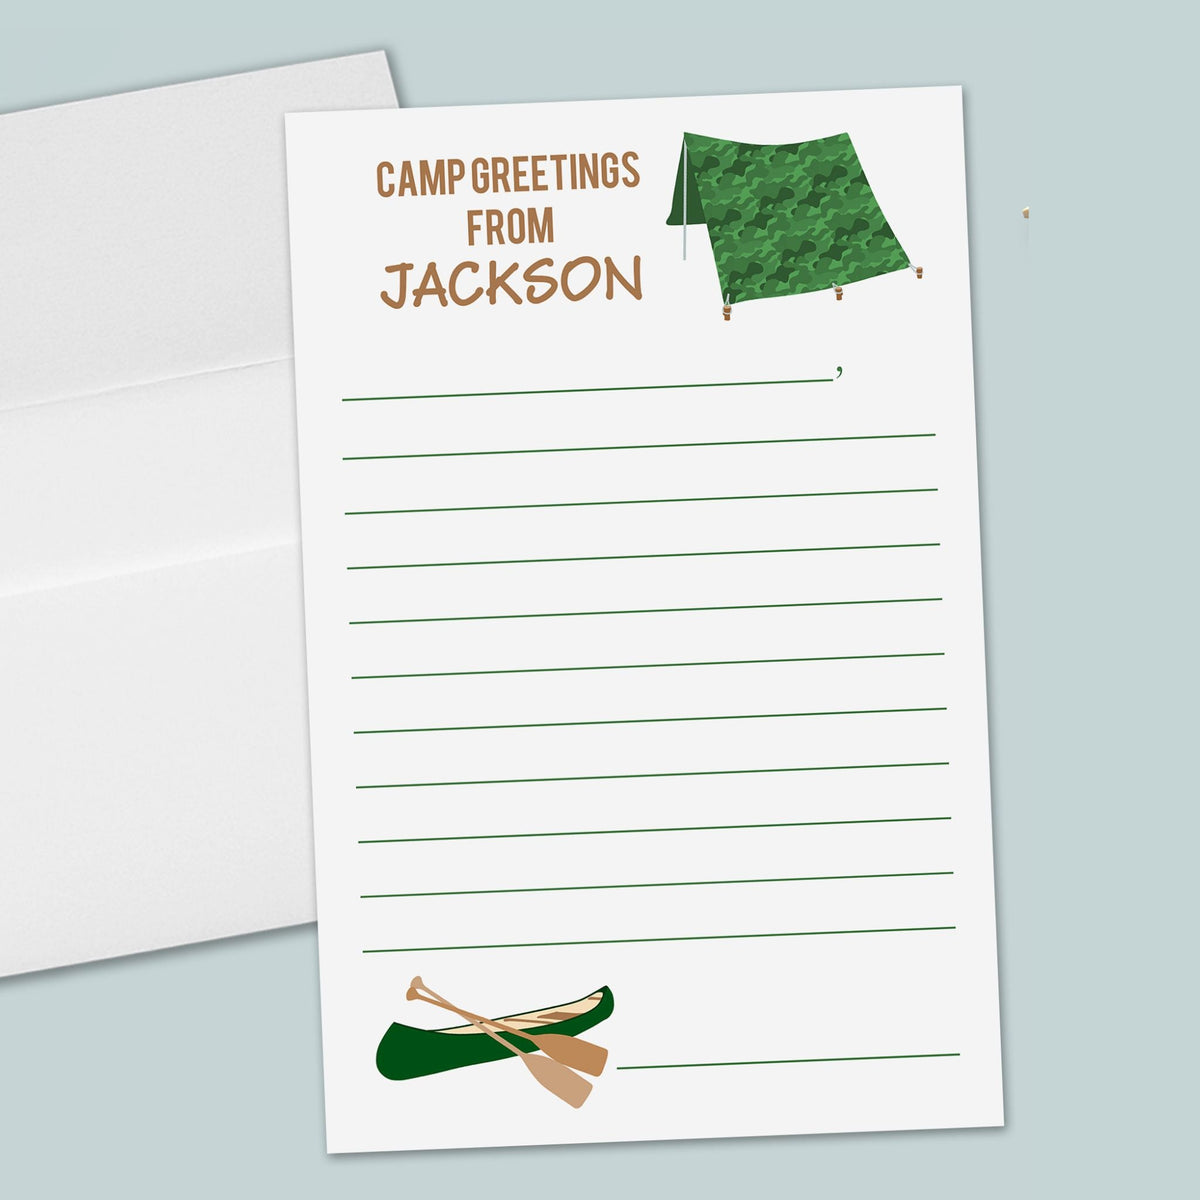 Canoe and Tent - Personalized Lined Camp Stationery - The Note House